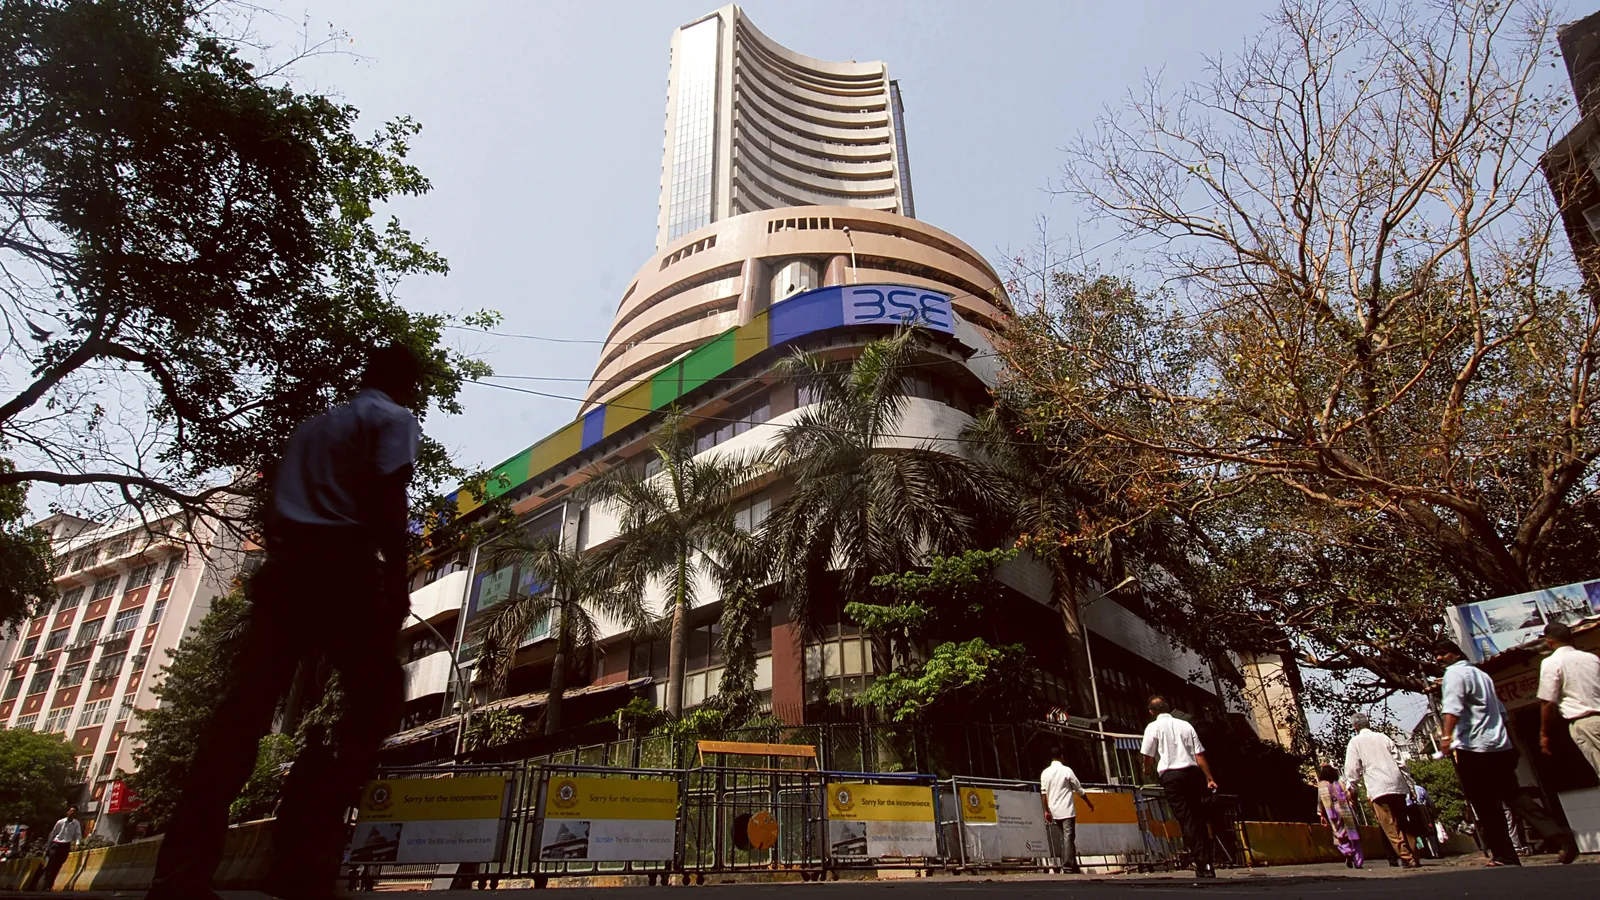 Markets fall for 5th day; Sensex cracks 817 points in early trade